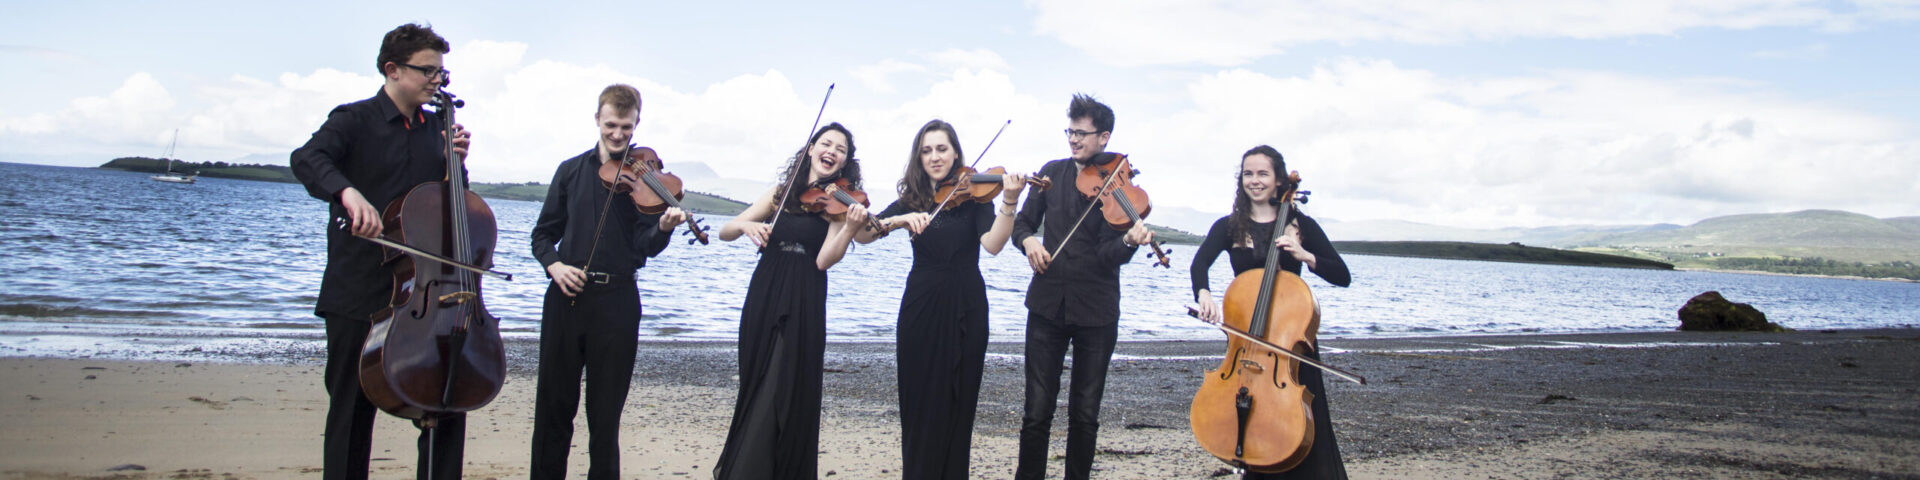 A group of string instrument players on a beach in West Cork